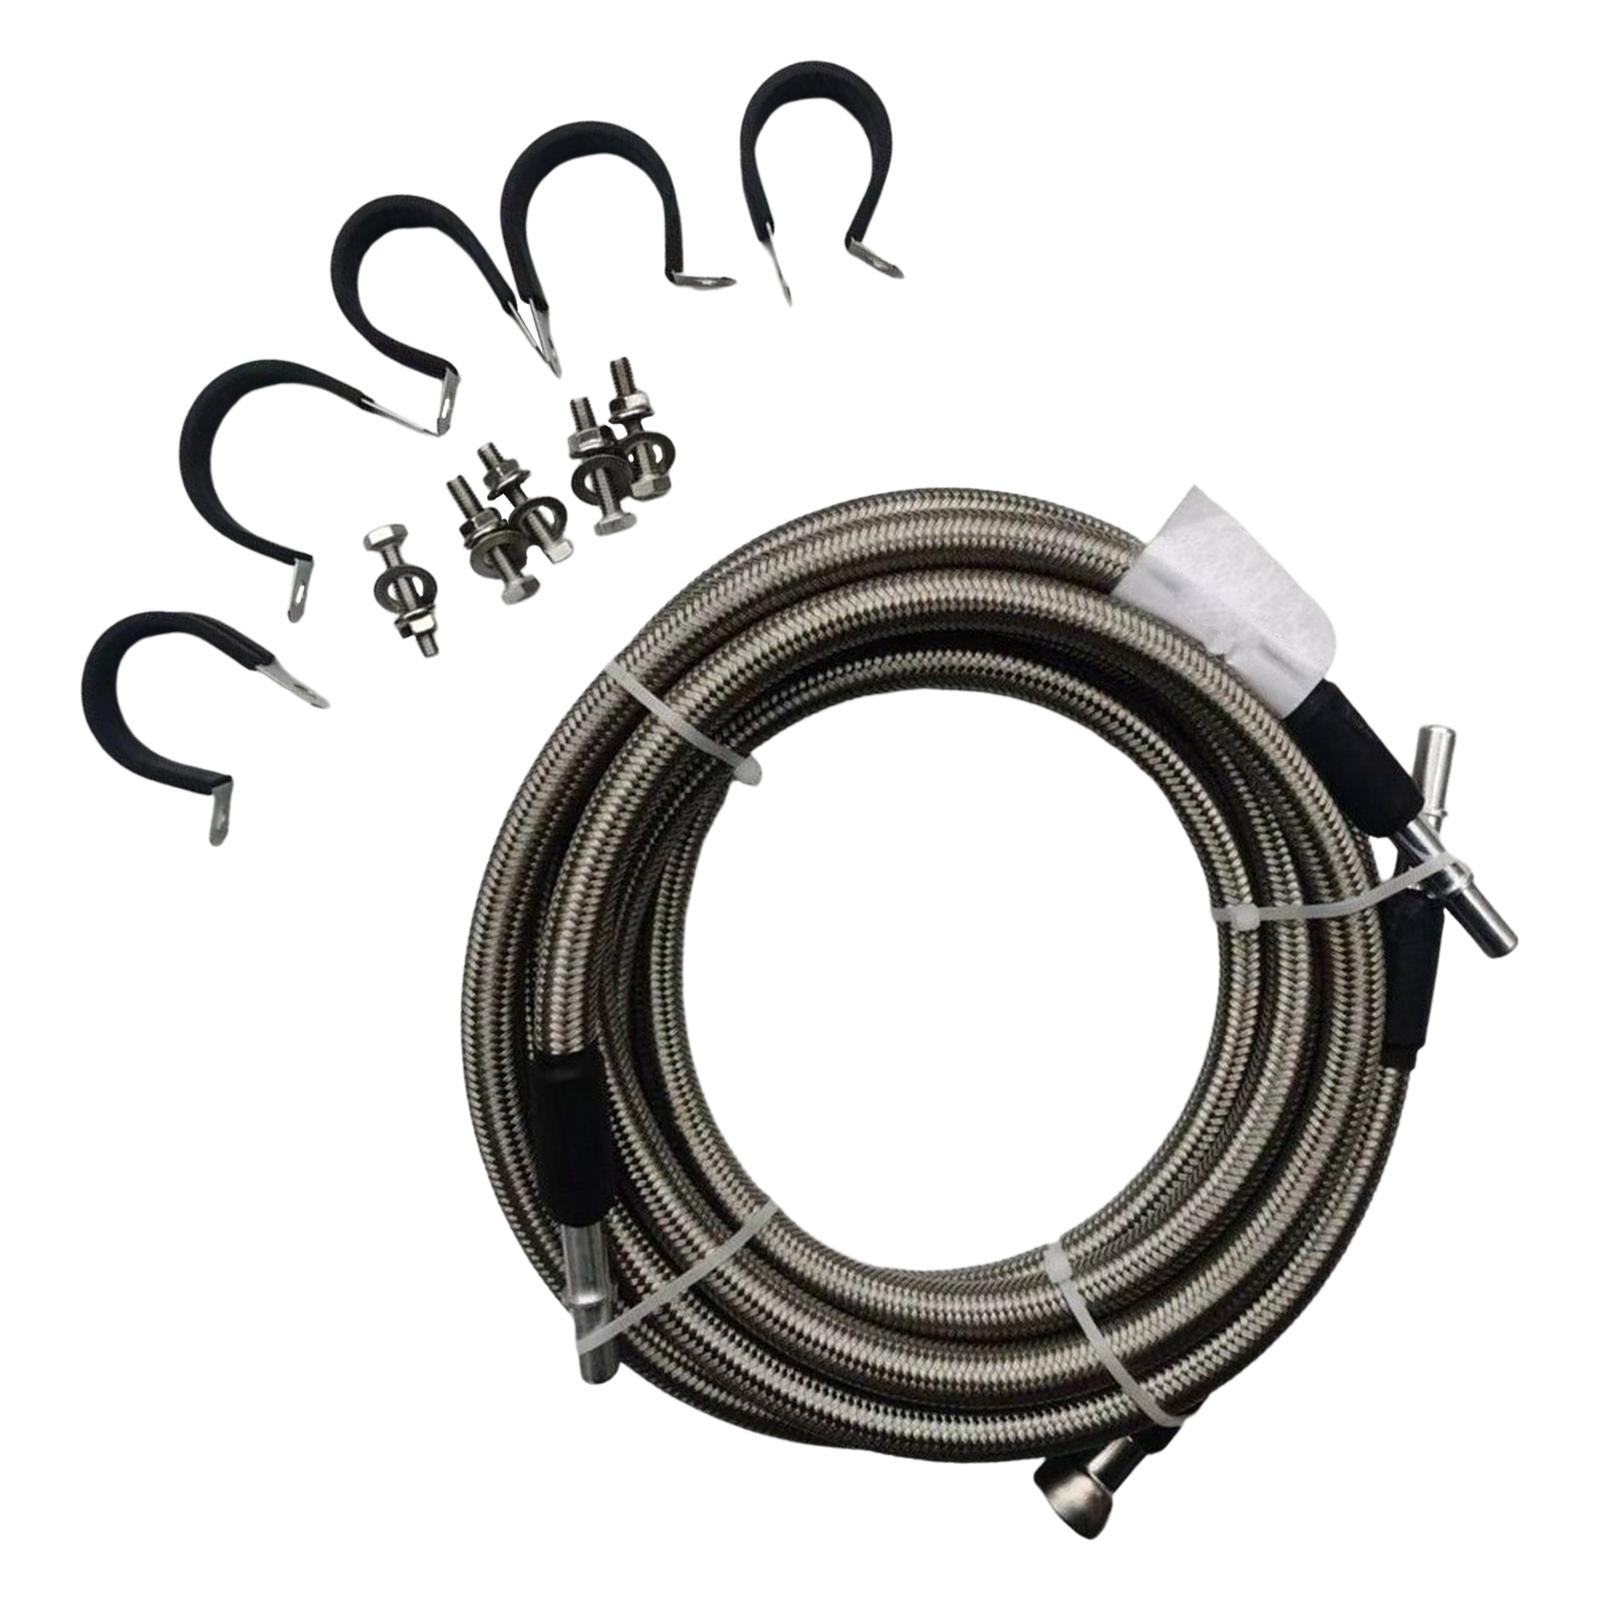 Fuel Pipe Fuel Hoses High Performance Tractors Braided Fuel Line Kits